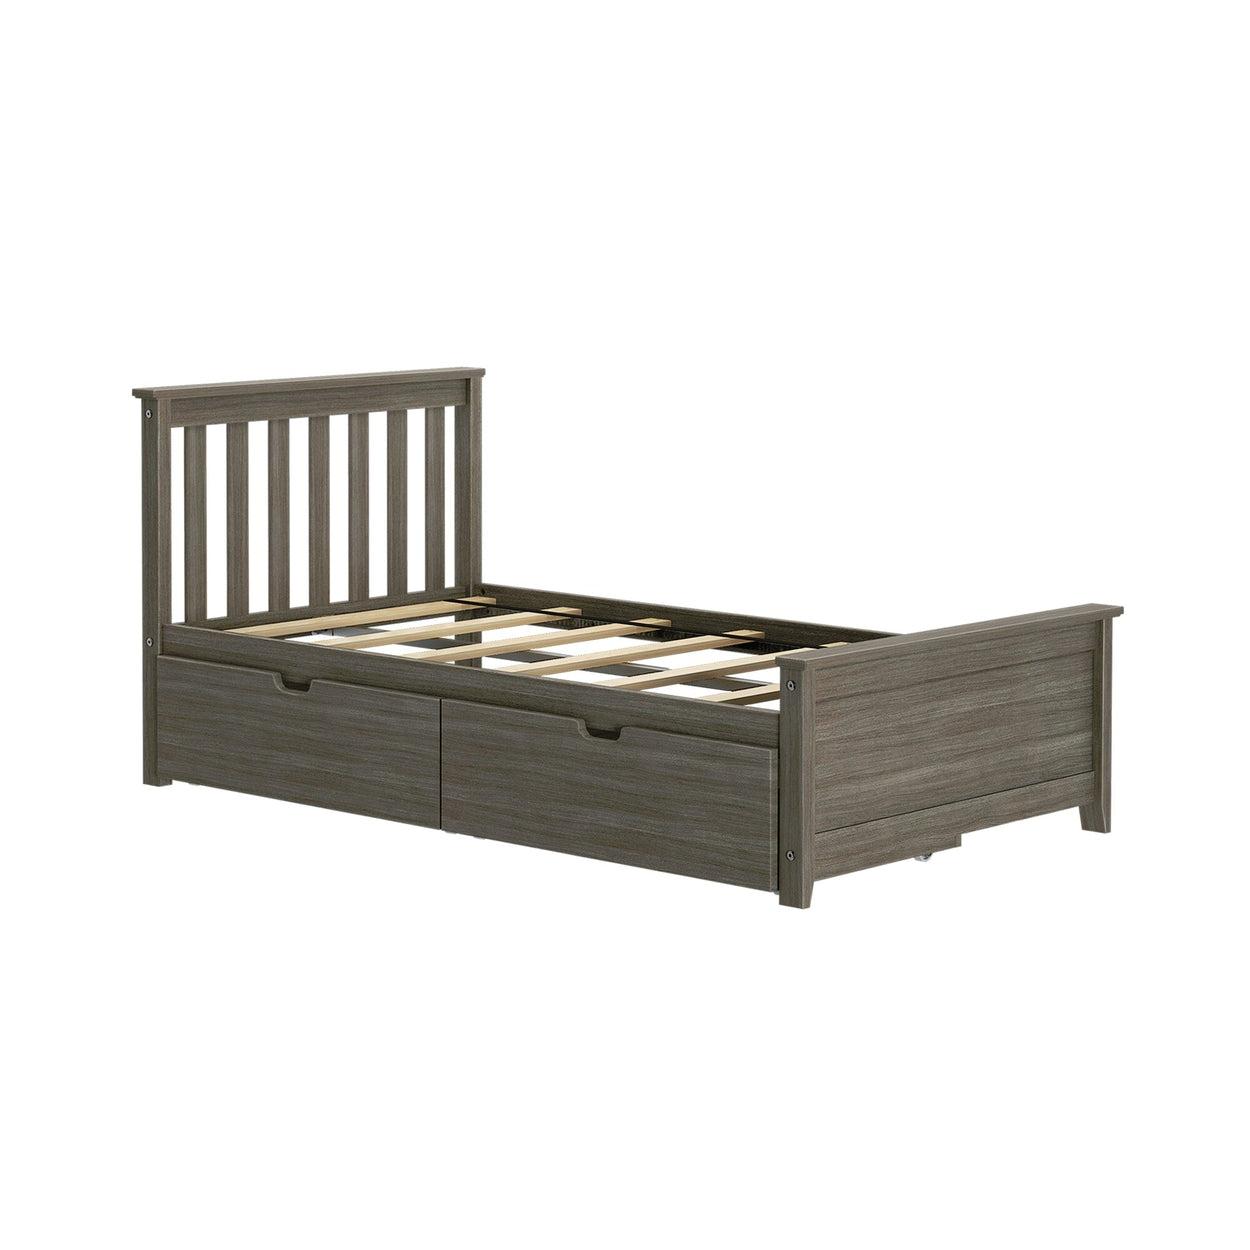 187210-151 : Kids Beds Twin-Size Platform with Underbed Storage Drawers, Clay